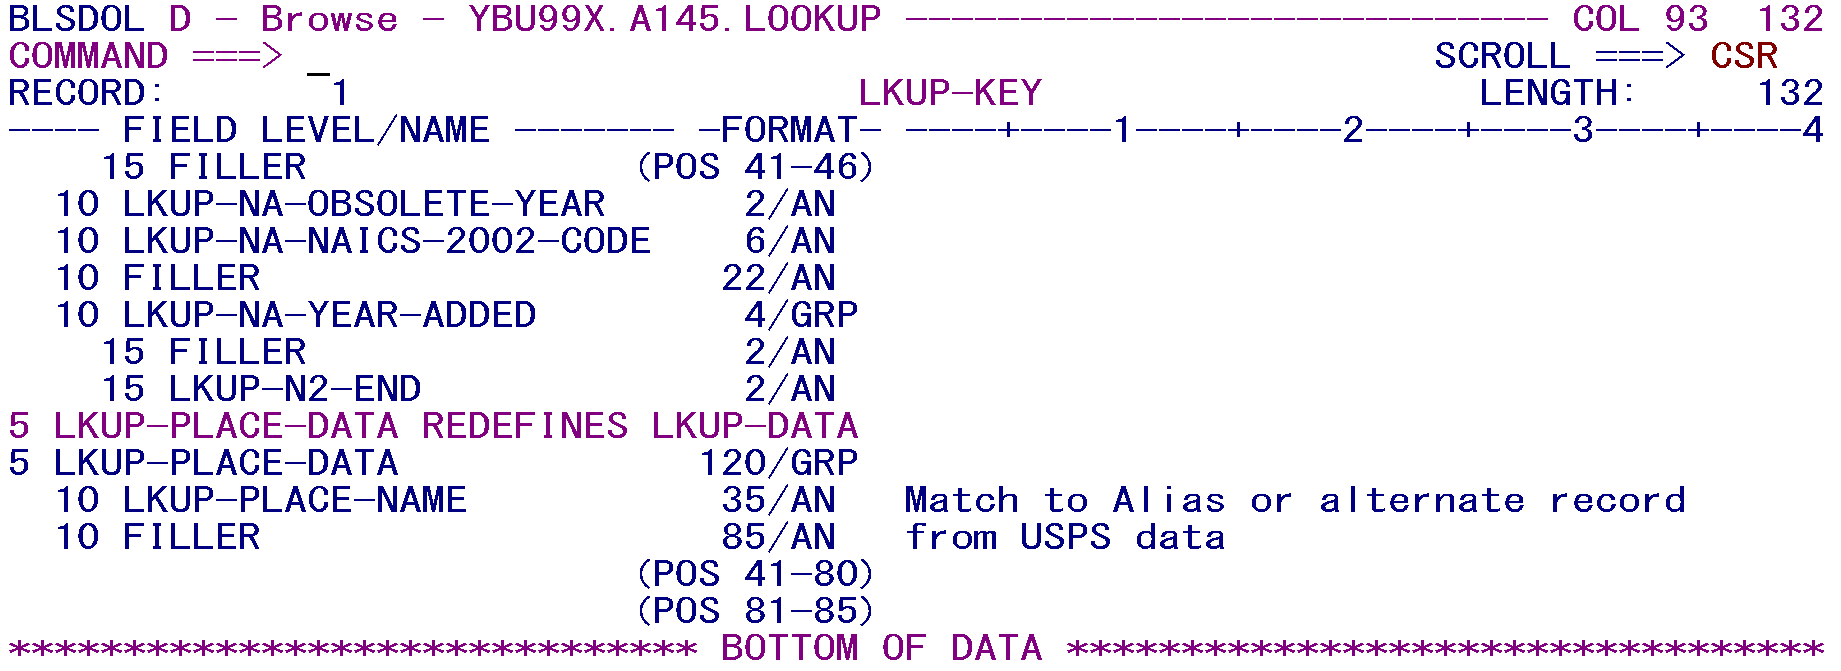 065 - all possible keys shown.png